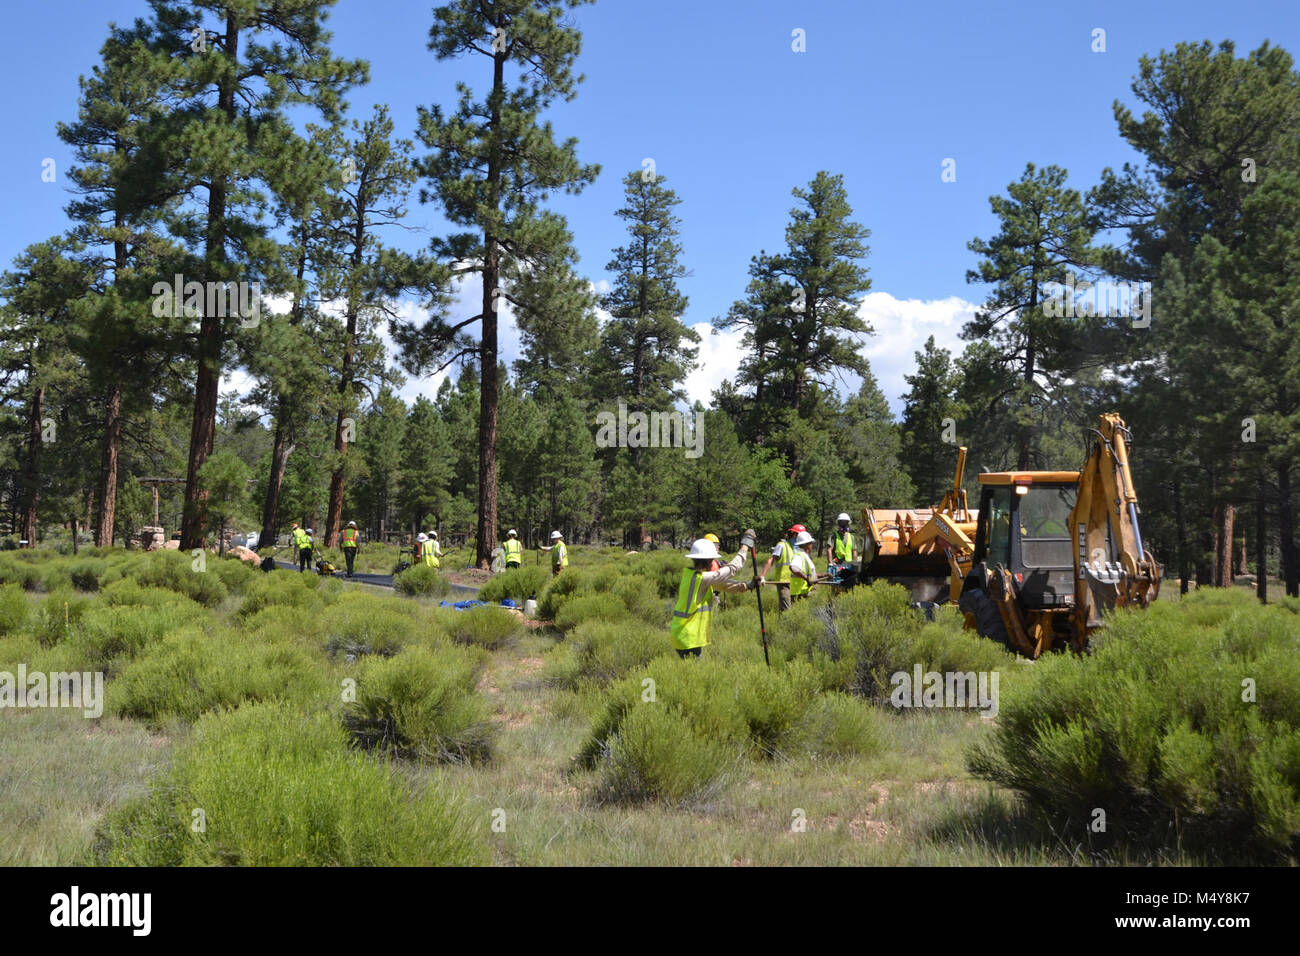 Workers and machines work in the trees to pave the Greenway Trail.  Between August 10 to September 10, 2016 the Greenway Trail between the IMAX Theater parking area in Tusayan and Center Road in Grand Canyon National Park will be closed while Grand Canyon's trail crew installs asphalt. The portion of the trail north of Center Road will not be affected.  While the trail closure is in effect, cyclists and hikers may ride the Tusayan shuttle (Purple Route) which is equipped with bicycle carrier racks. The shuttle connects Tusayan with the South Rim Visitor Center, a 20 minute ride each way.  The  Stock Photo